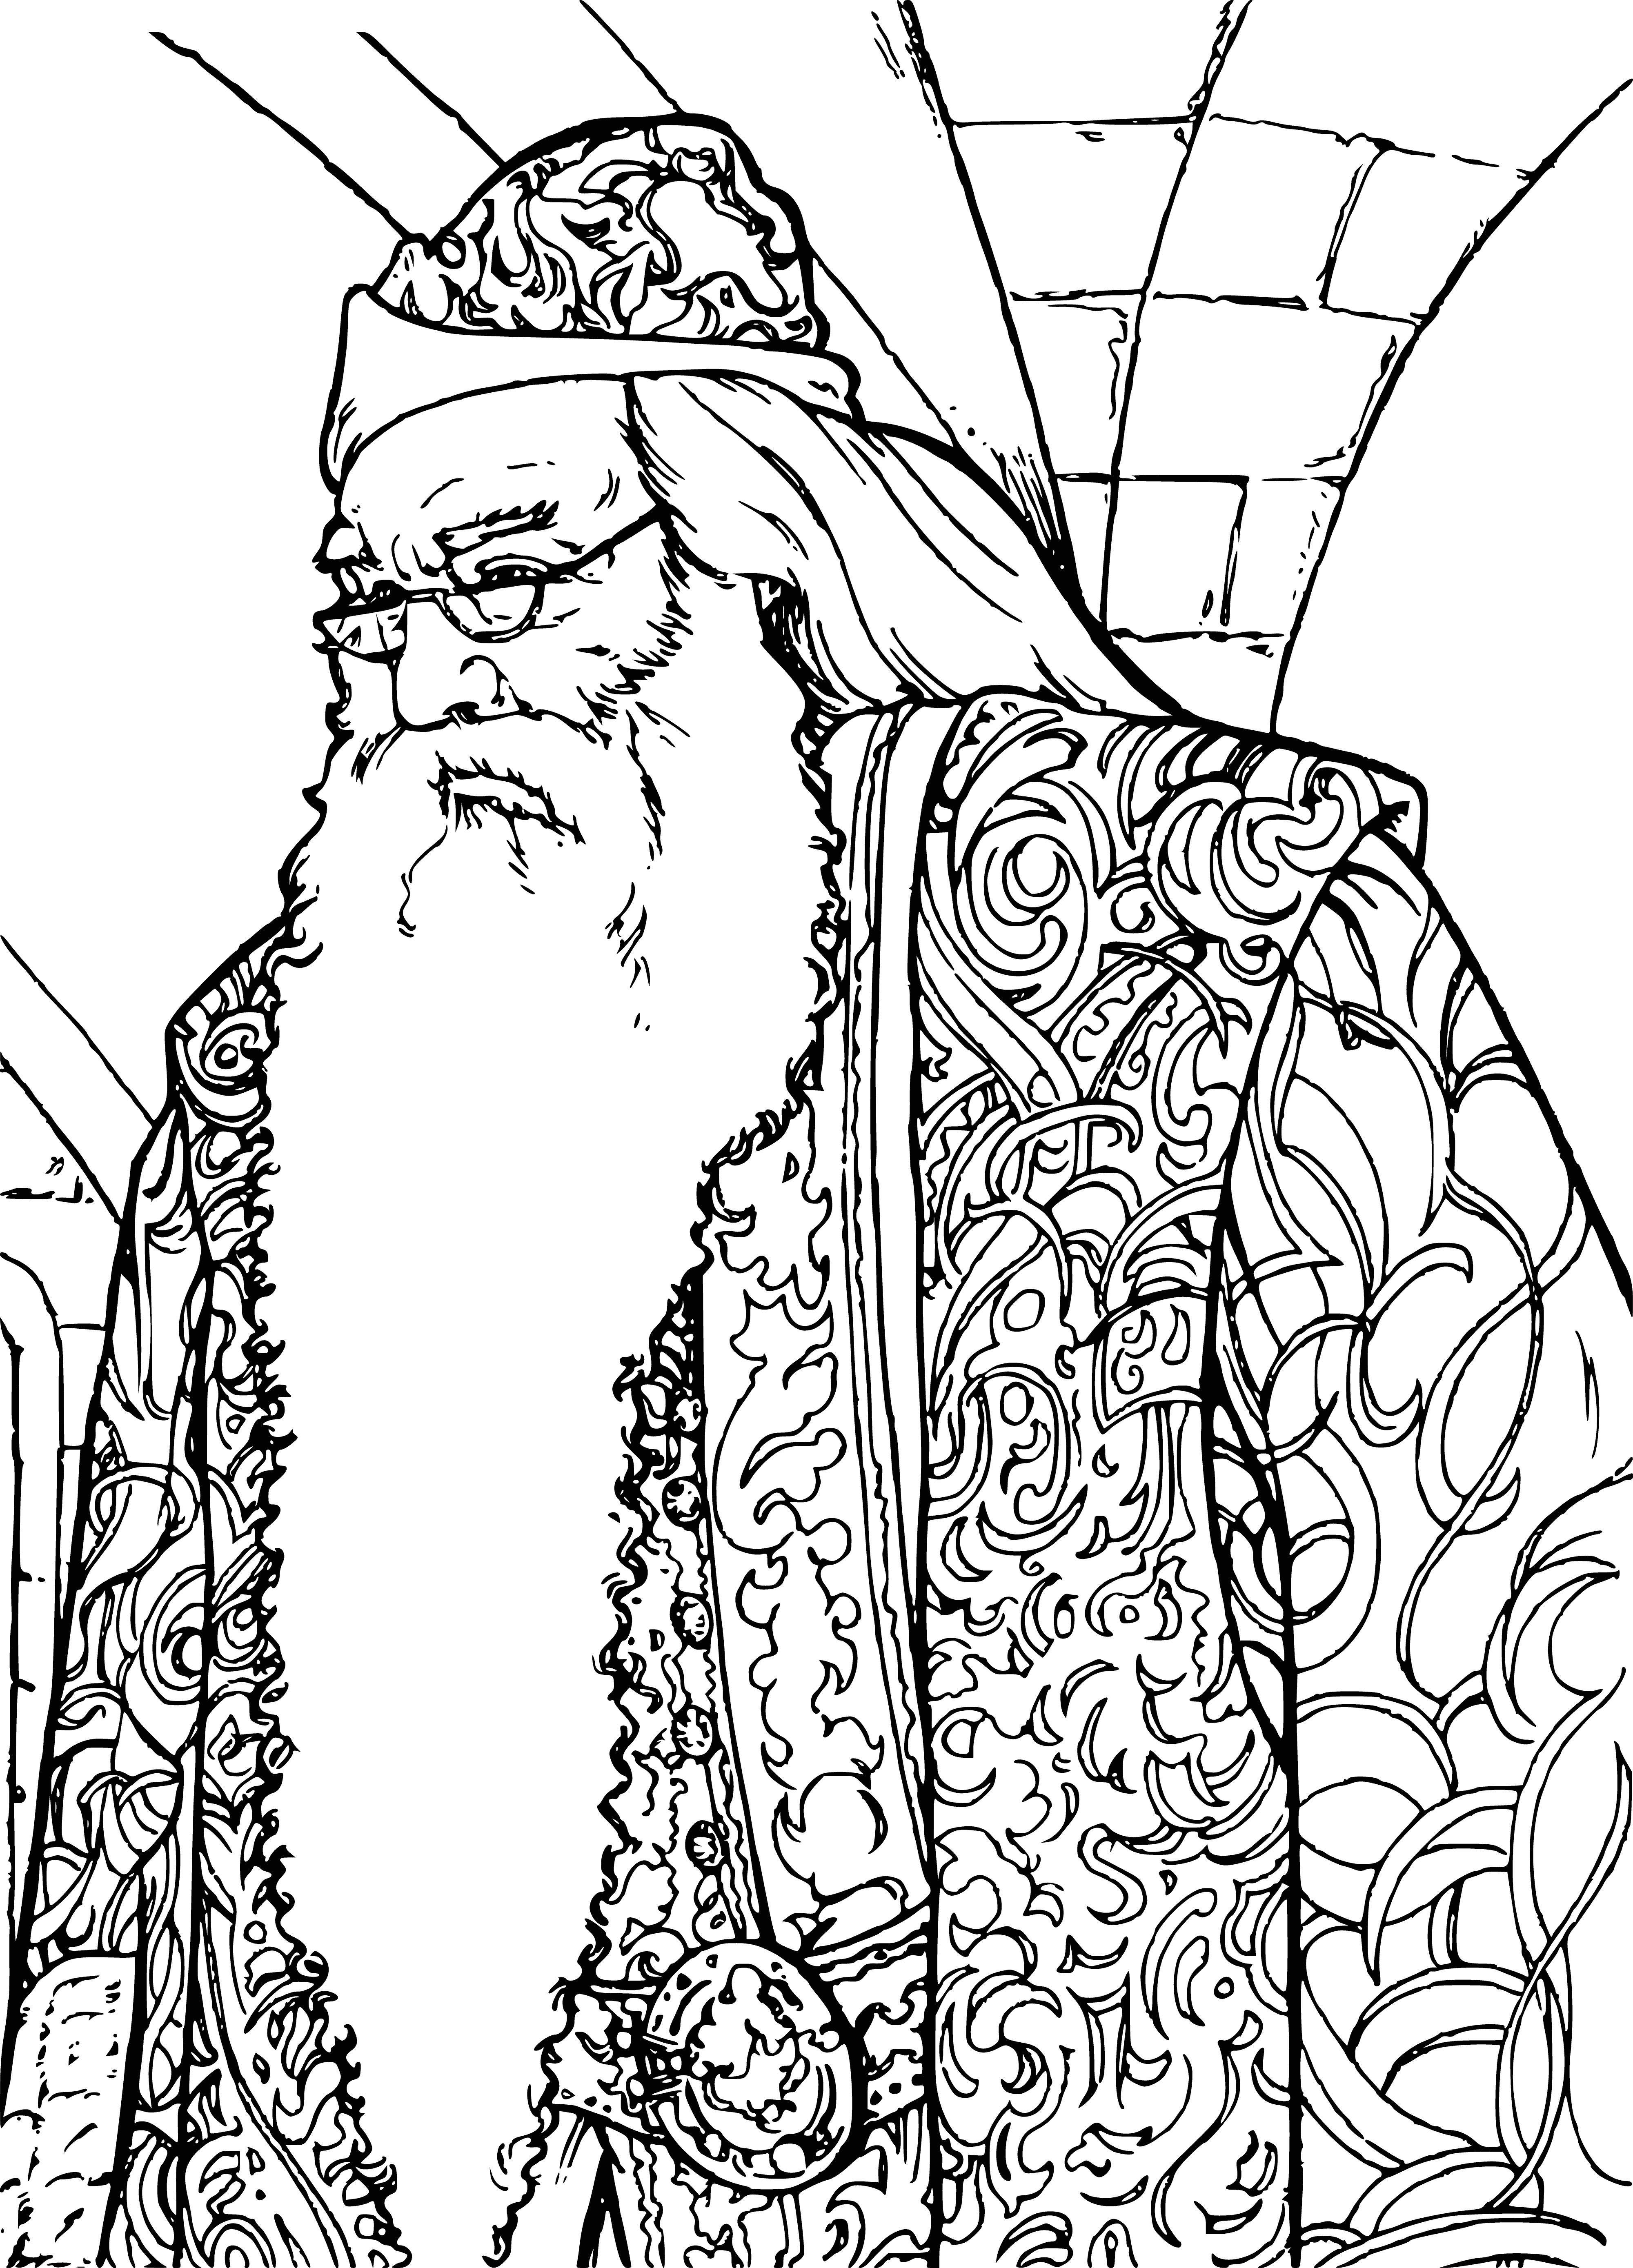 coloring page: Kind, wise Dumbledore has silver hair, beard & robes. Twinkling blue eyes make him look like he knows a lot about magic.